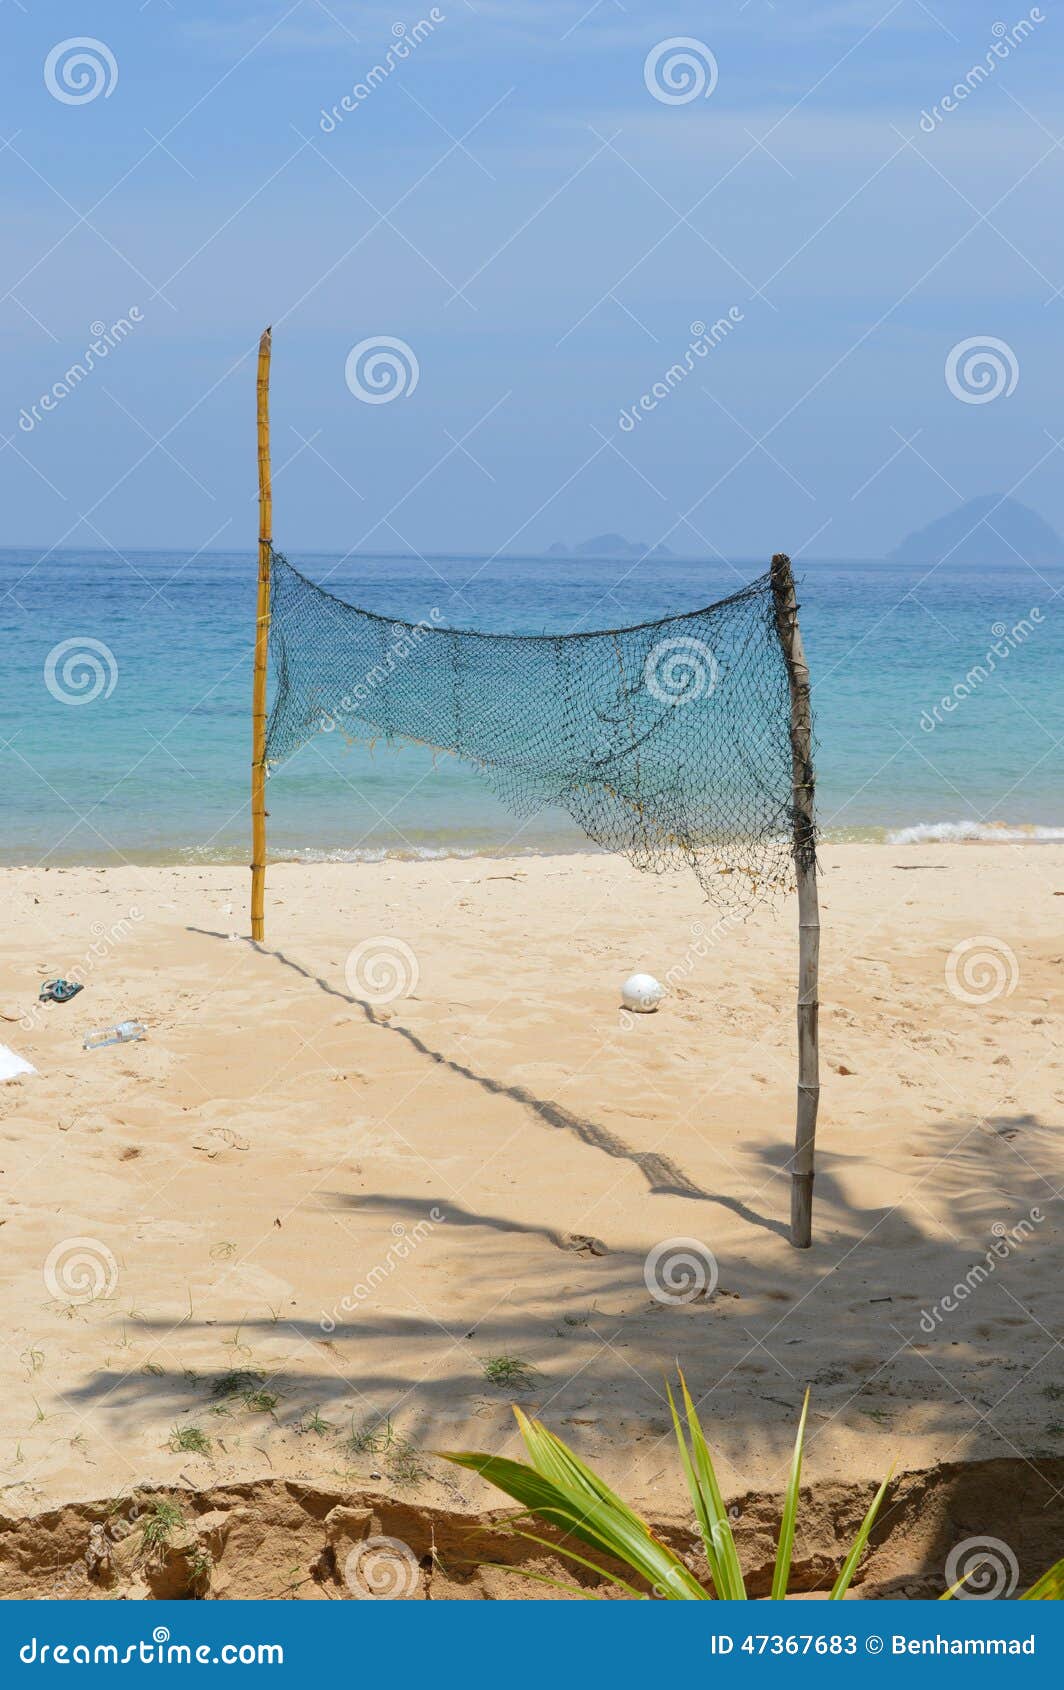 Volleyball Field at the Beach Stock Image - Image of asia, game